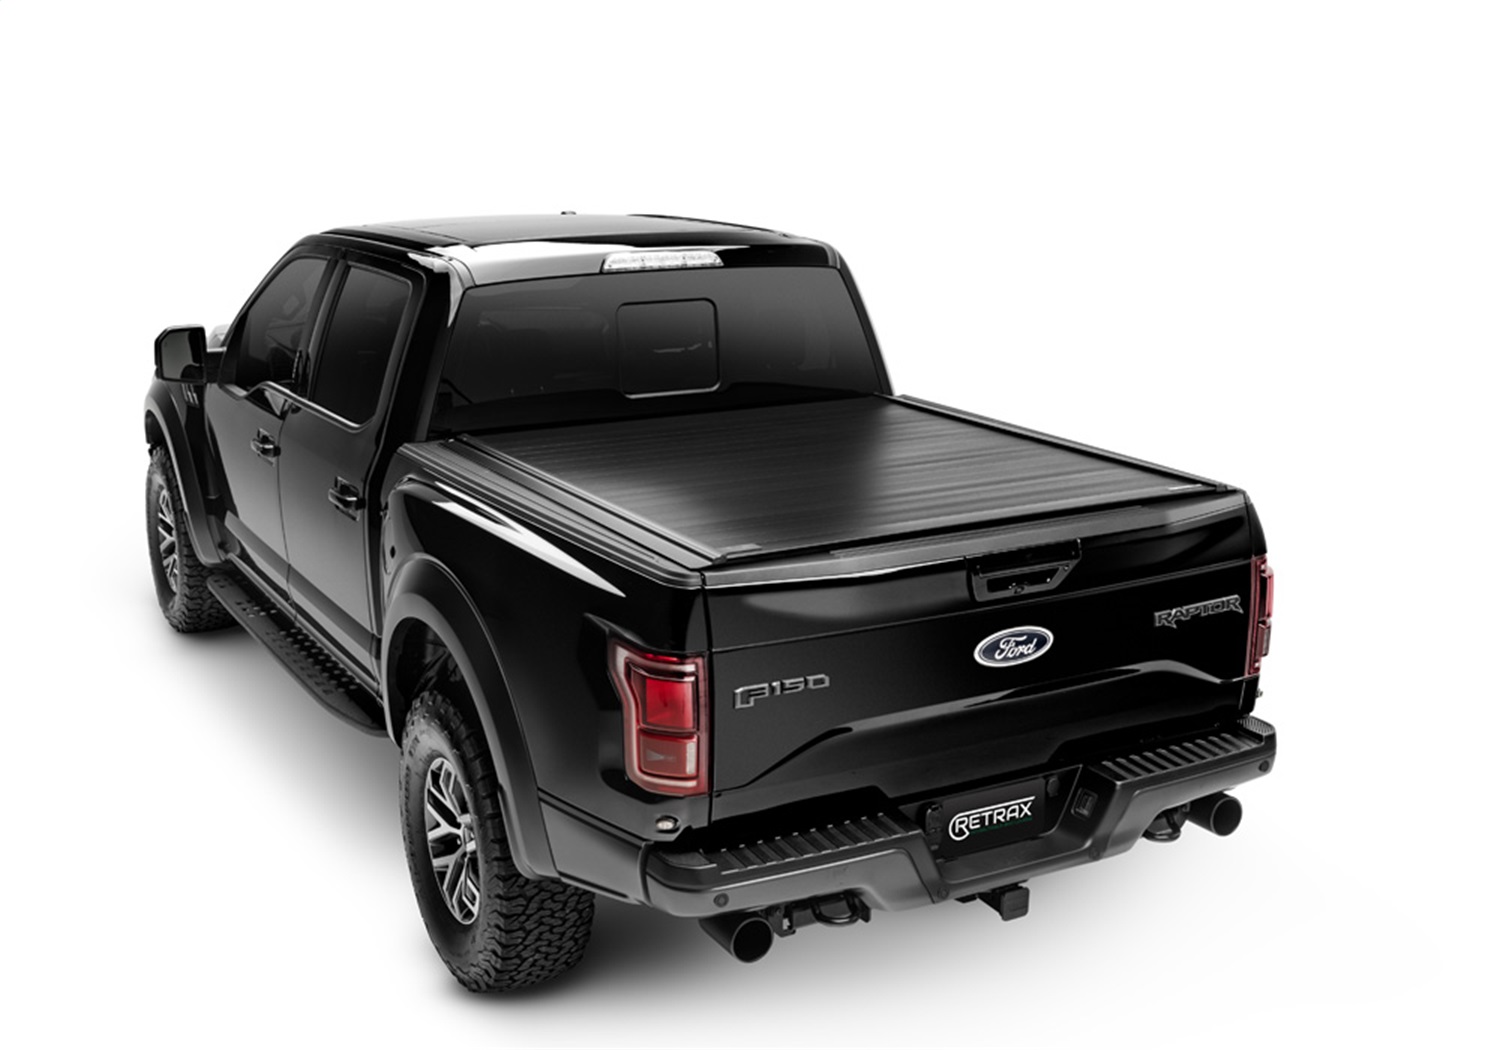 Budge Duro Layer Truck Cover, Water Resistant, Scratchproof, Dustproof Cover, Fits Trucks up to 16'5", Gray - 4